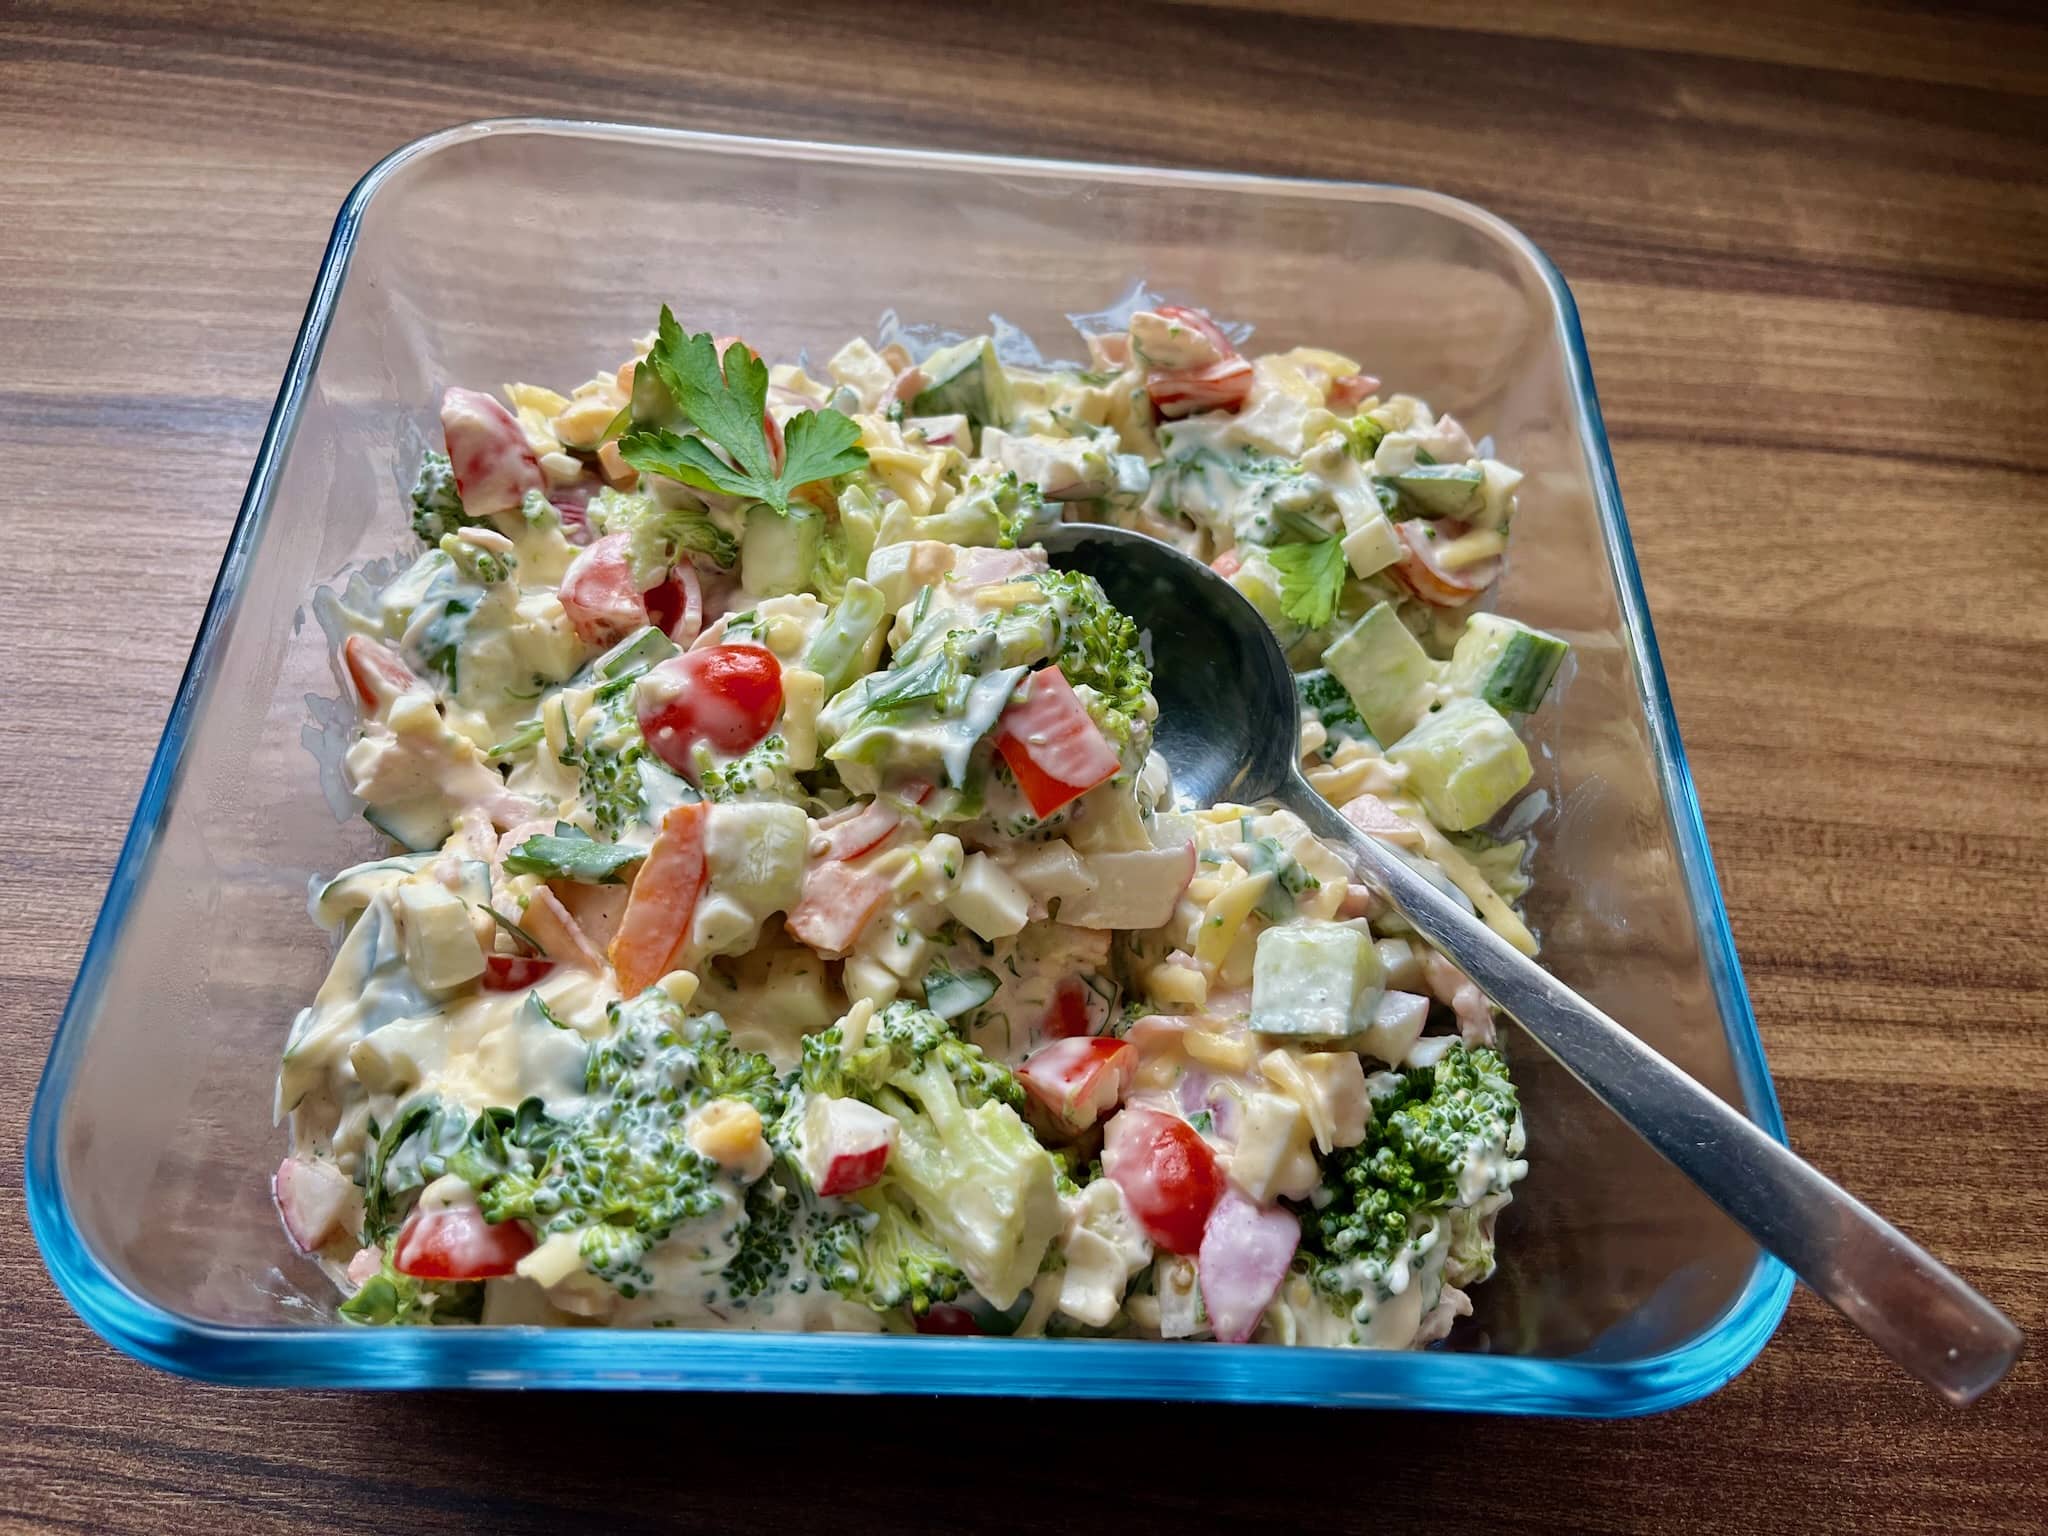 Broccoli and Egg Salad in a bowl ready to eat